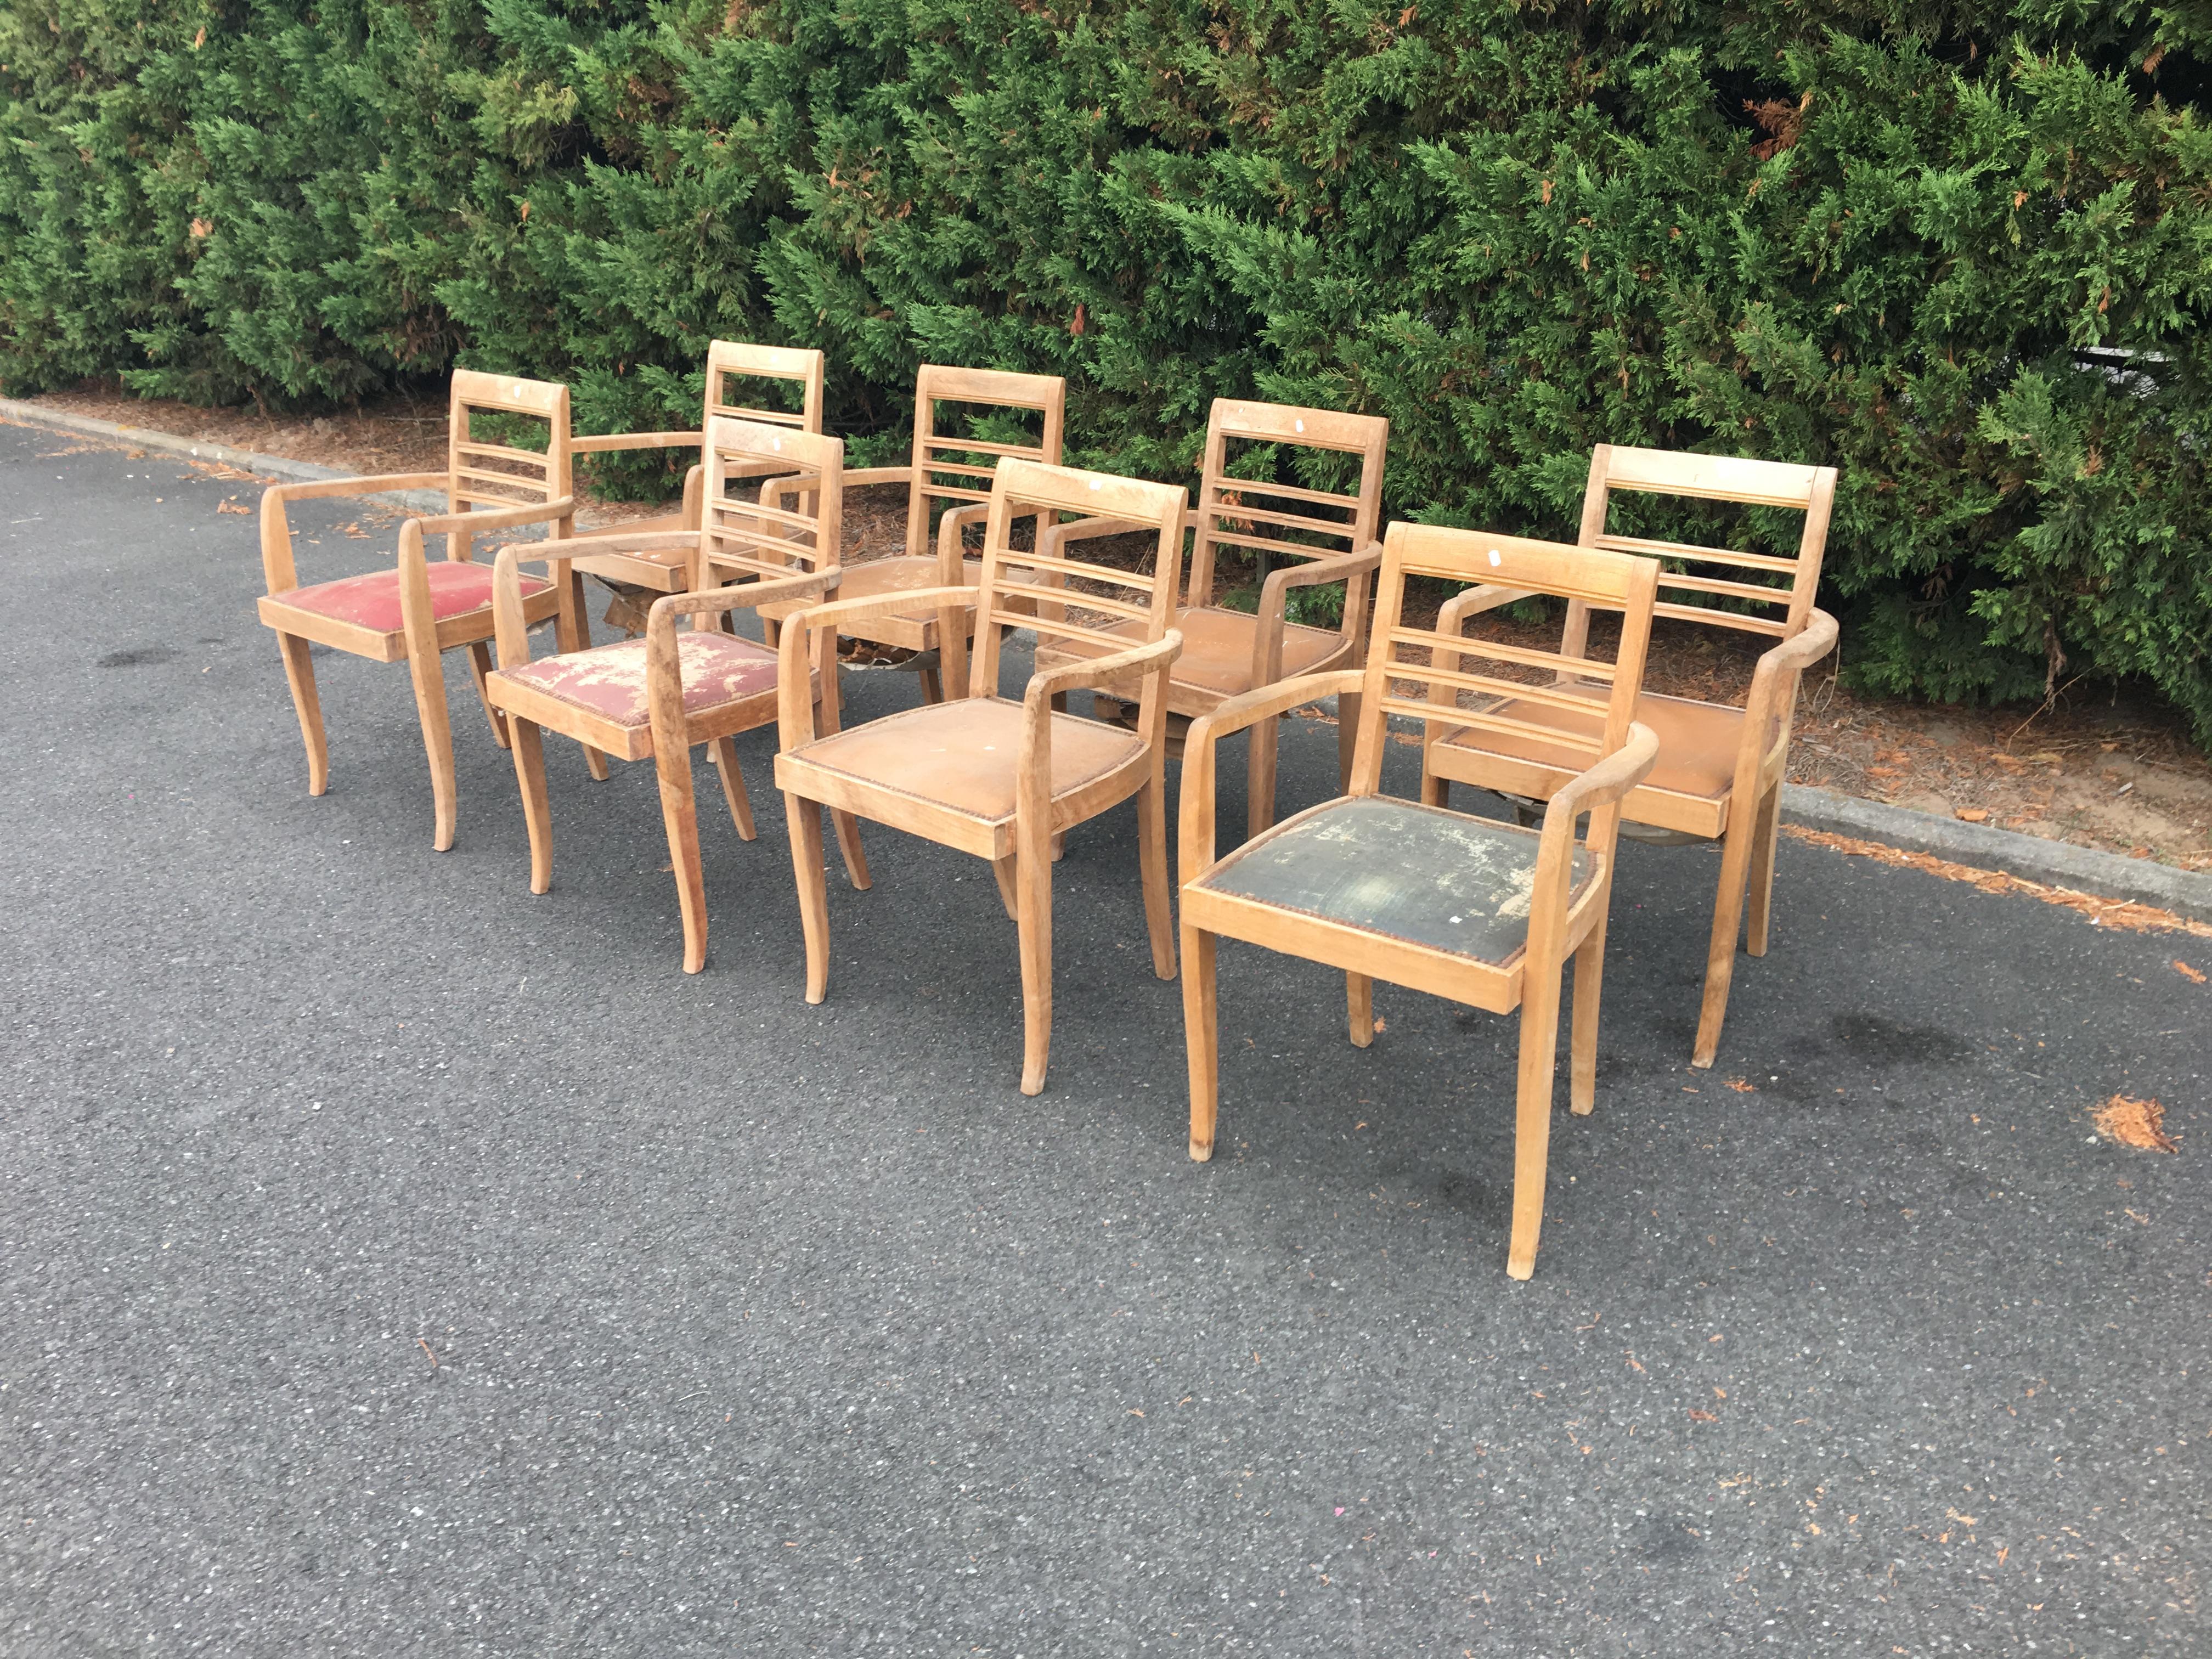 8 Art Deco armchairs, circa 1930-1940.
to be restored.
the wood is dirty but in very good condition.
 